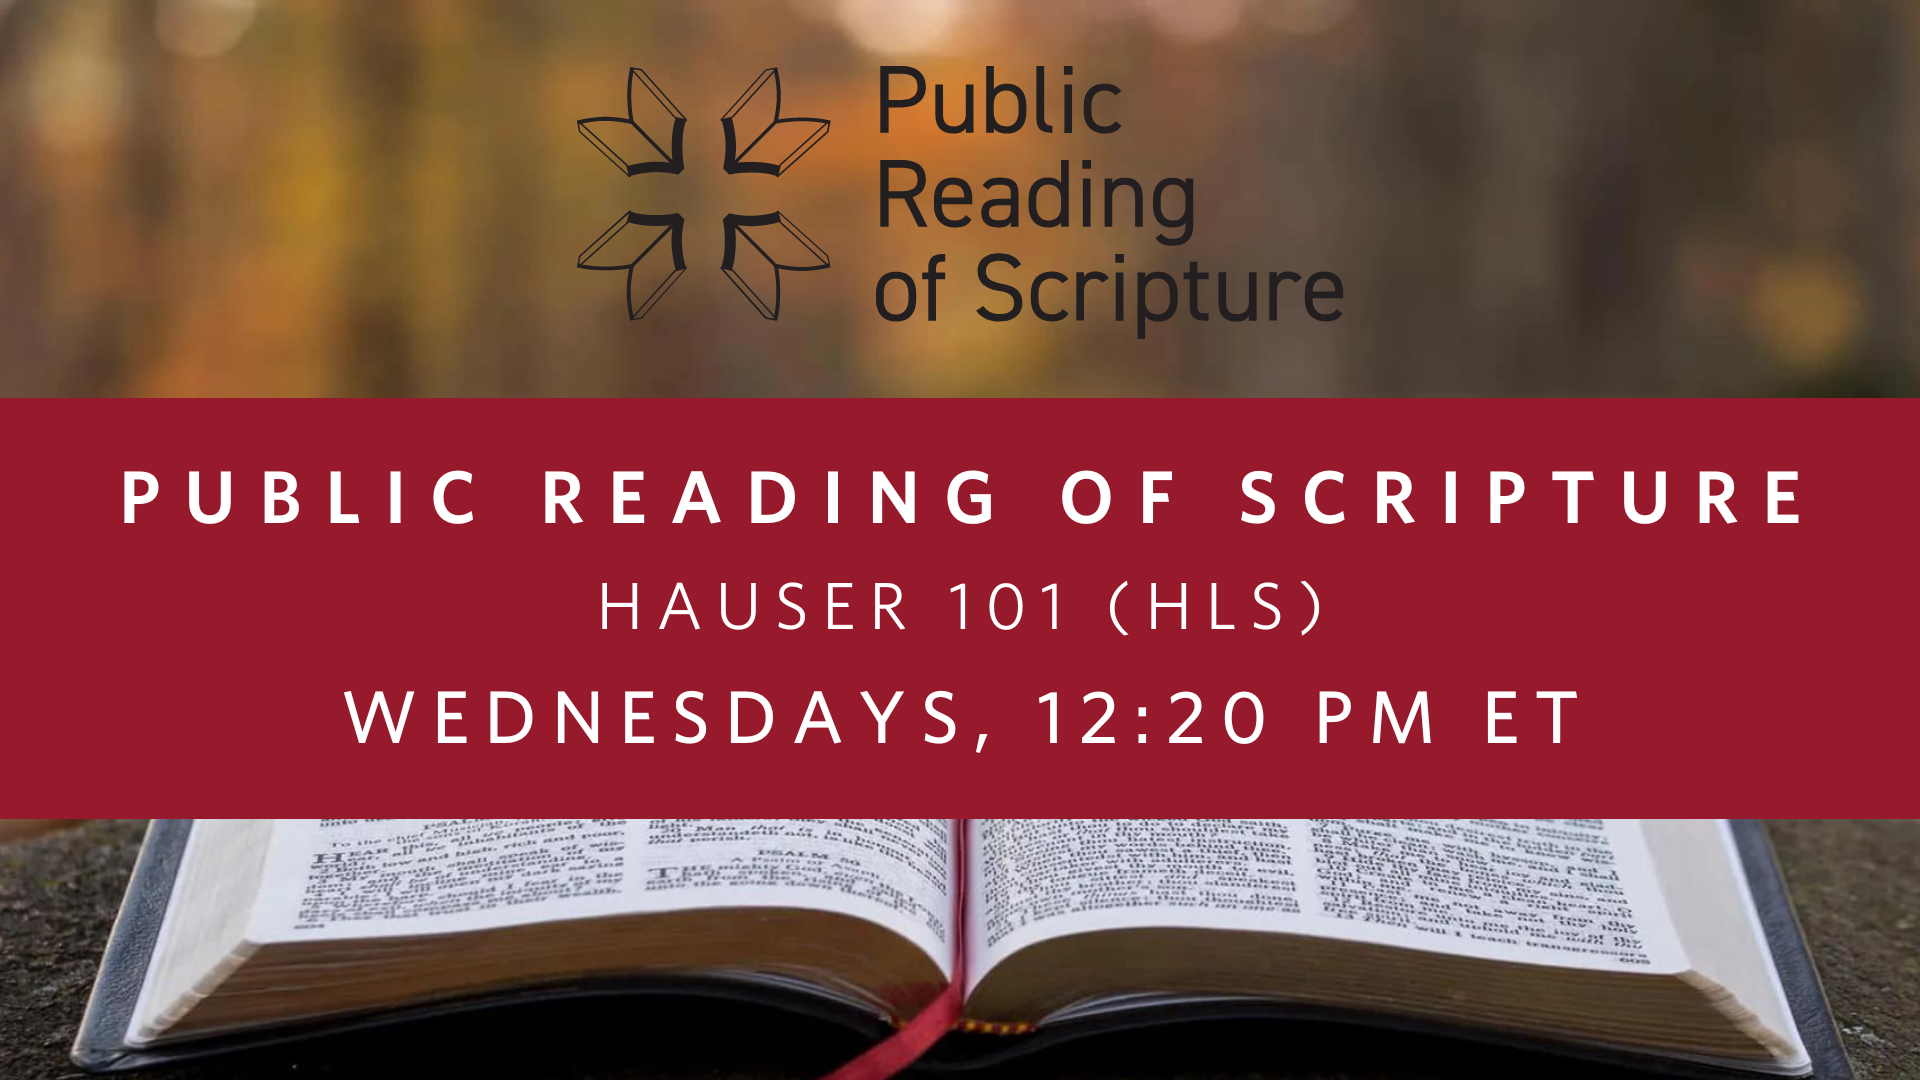 Public Reading of Scripture - Wednesdays at HLS (Hauser 101)